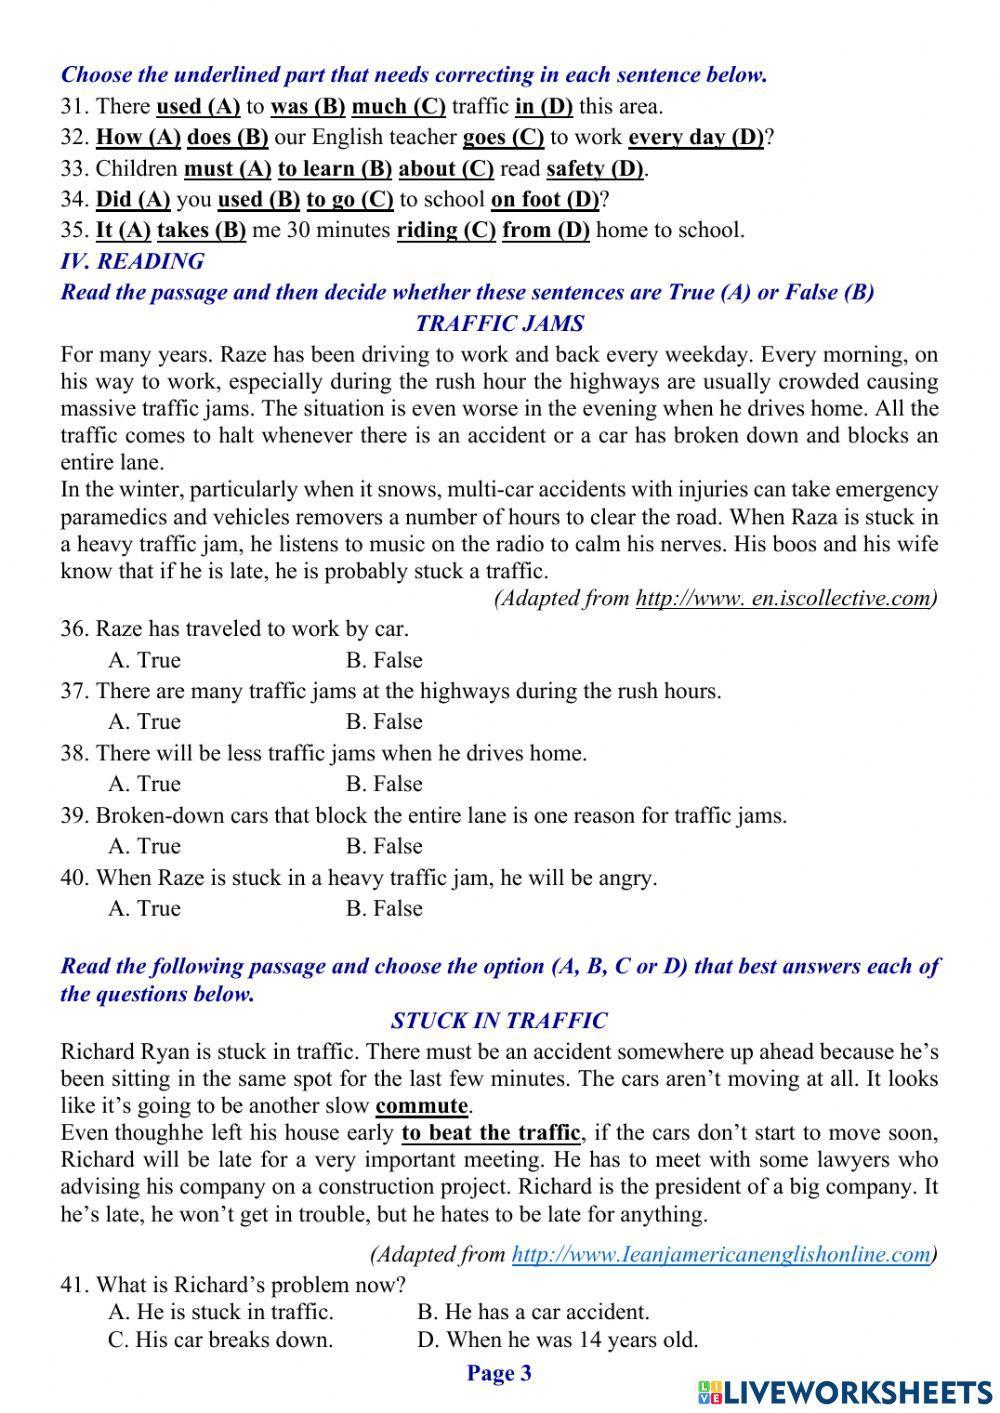 Tieng Anh Lop 7 -2nd Mid-Term Test 01